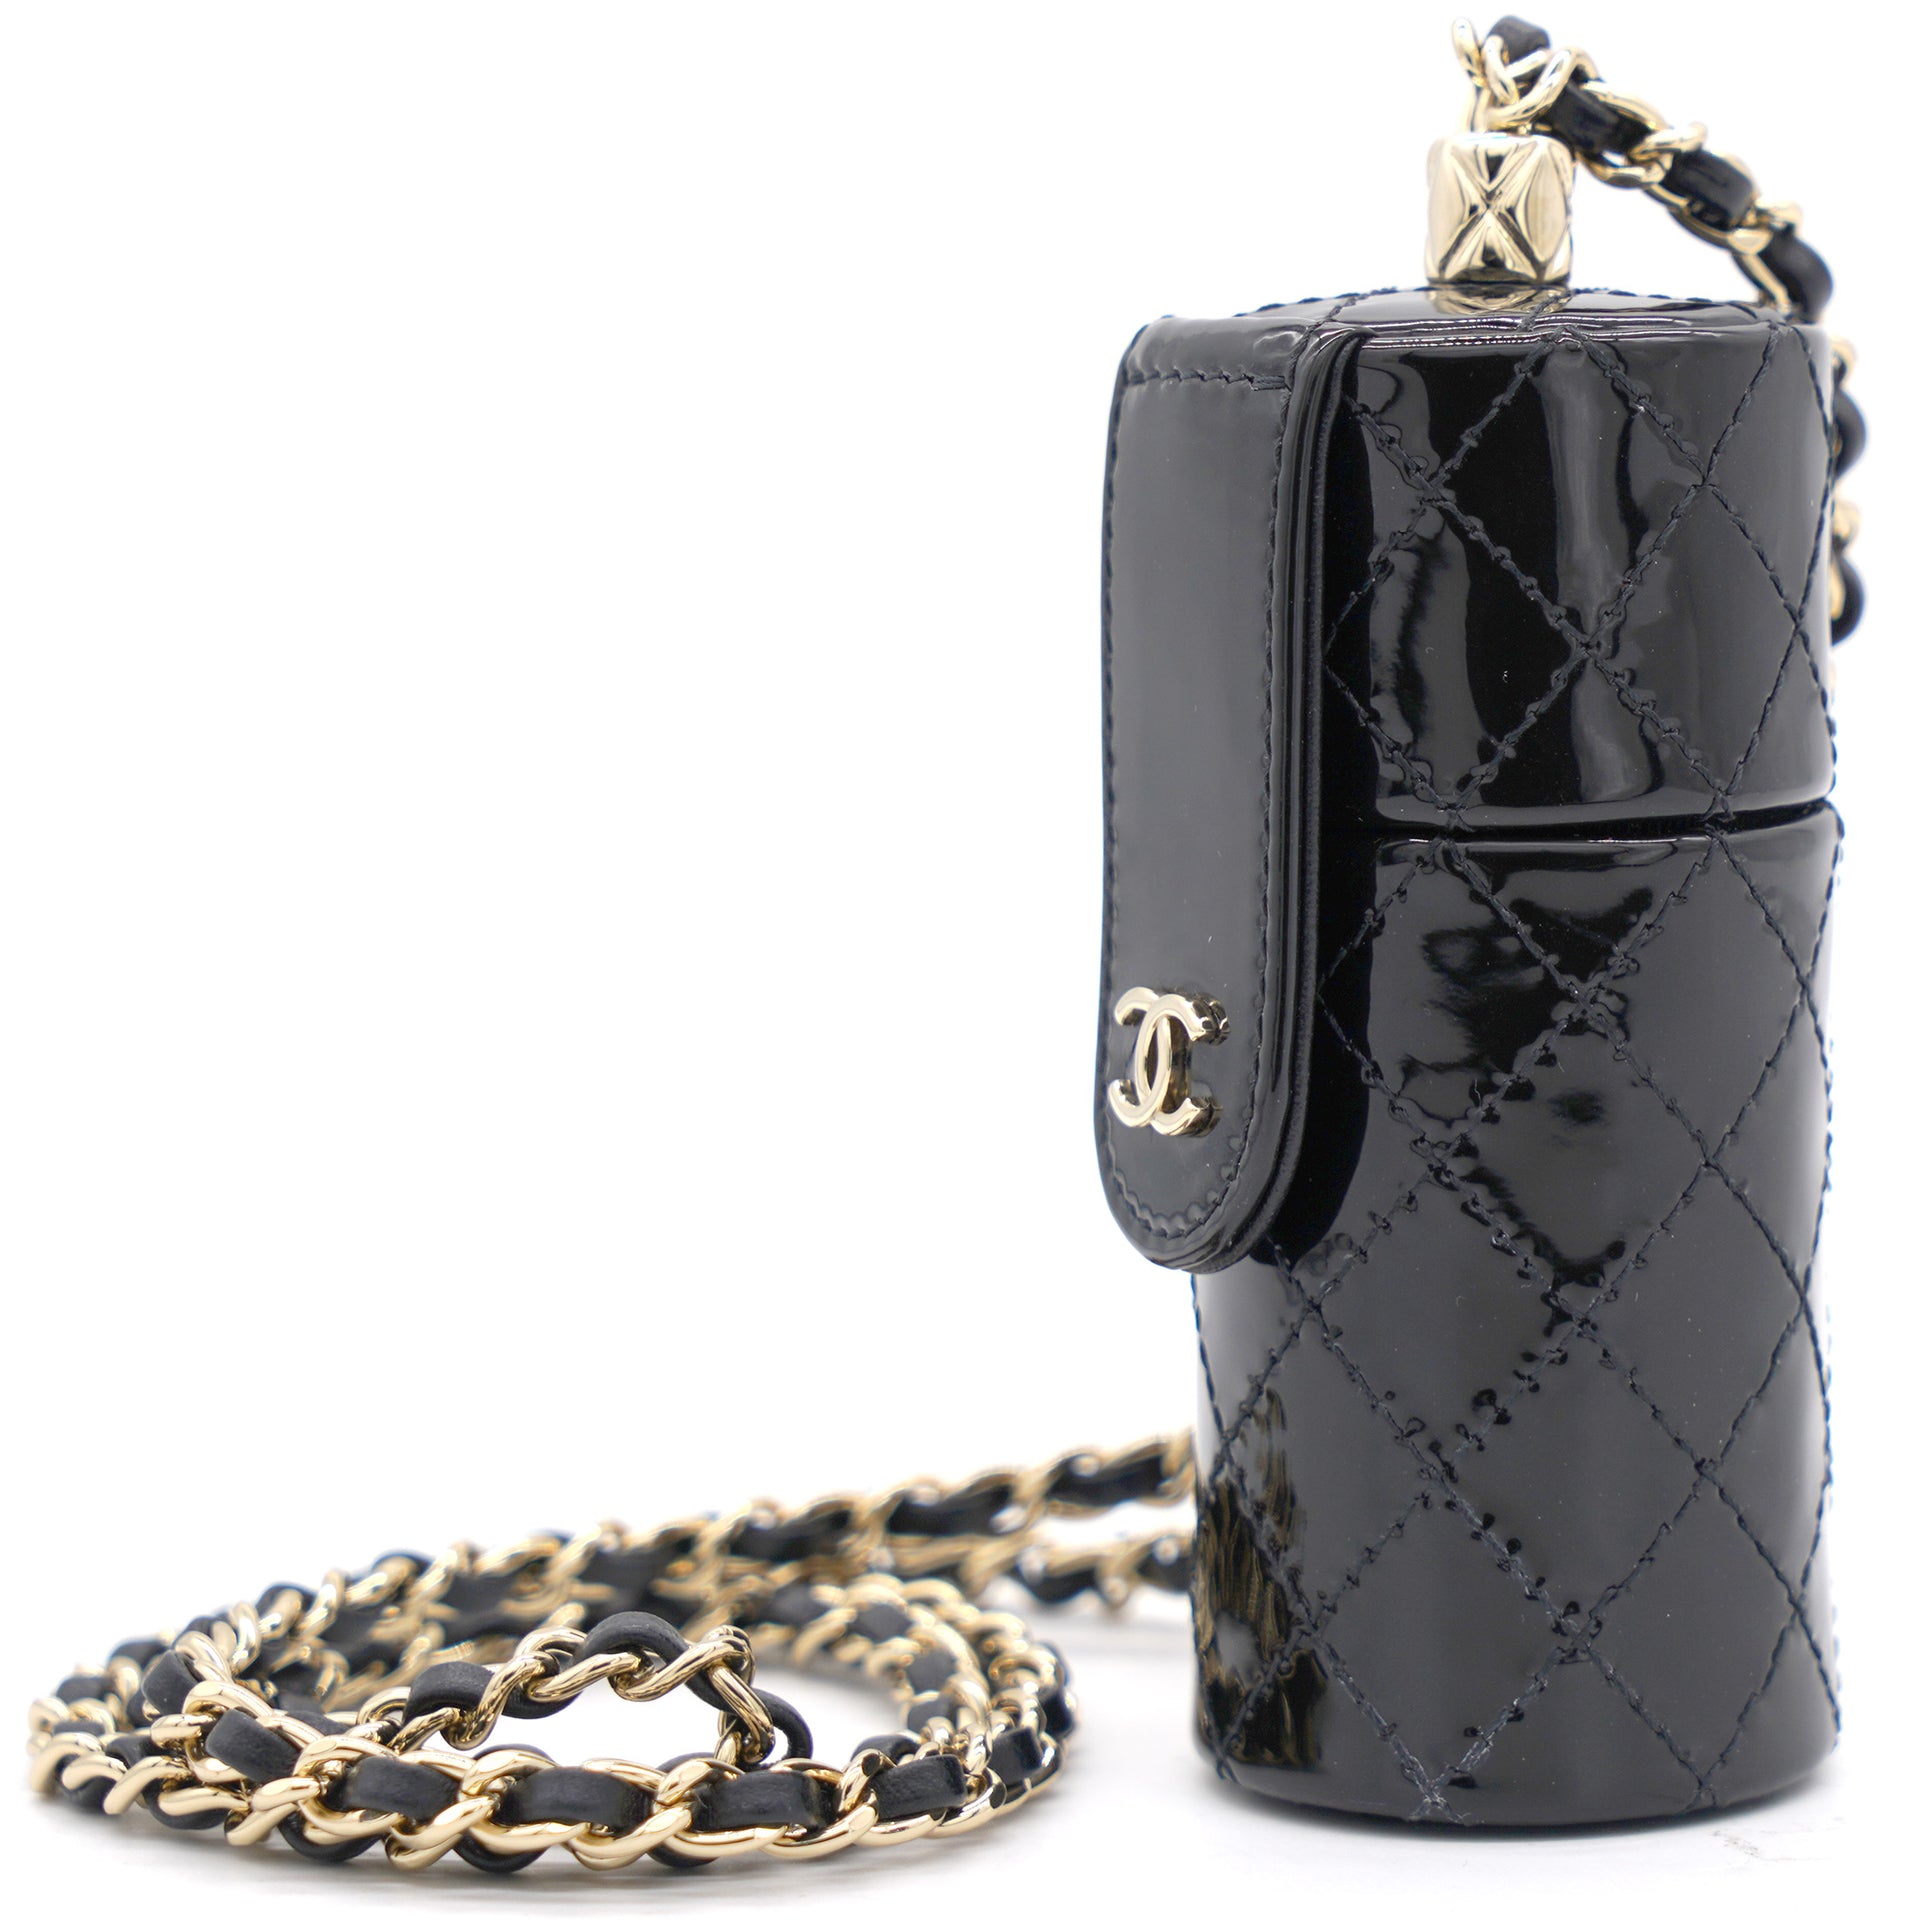 Chanel Black Quilted Patent Leather Lipstick Case On Chain, myGemma, JP